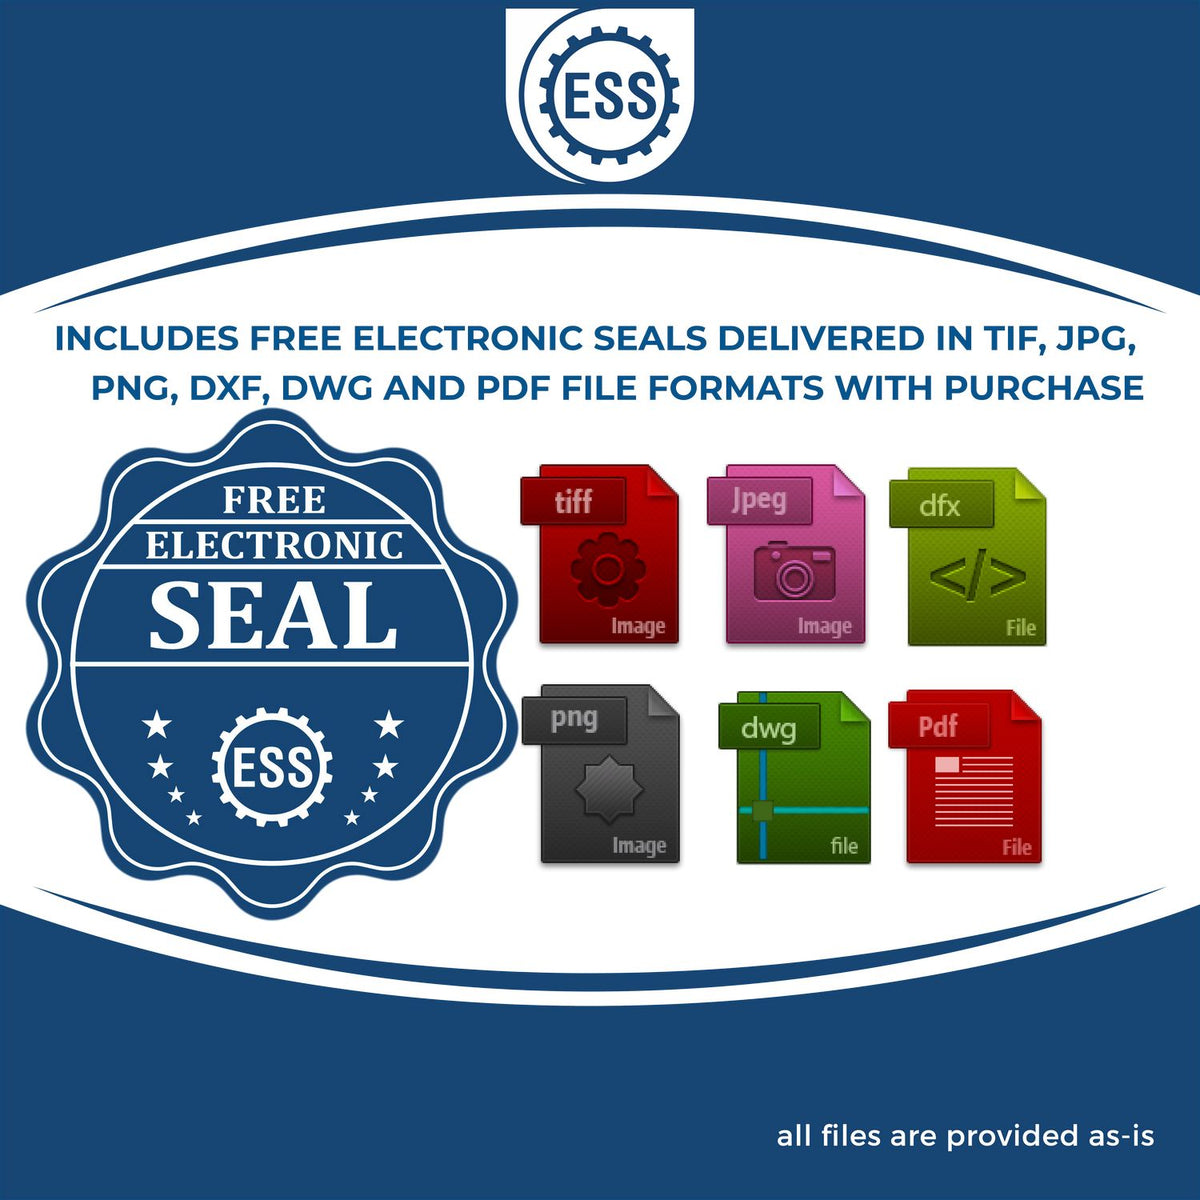 An infographic for the free electronic seal for the Slim Pre-Inked Illinois Professional Geologist Seal Stamp illustrating the different file type icons such as DXF, DWG, TIF, JPG and PNG.